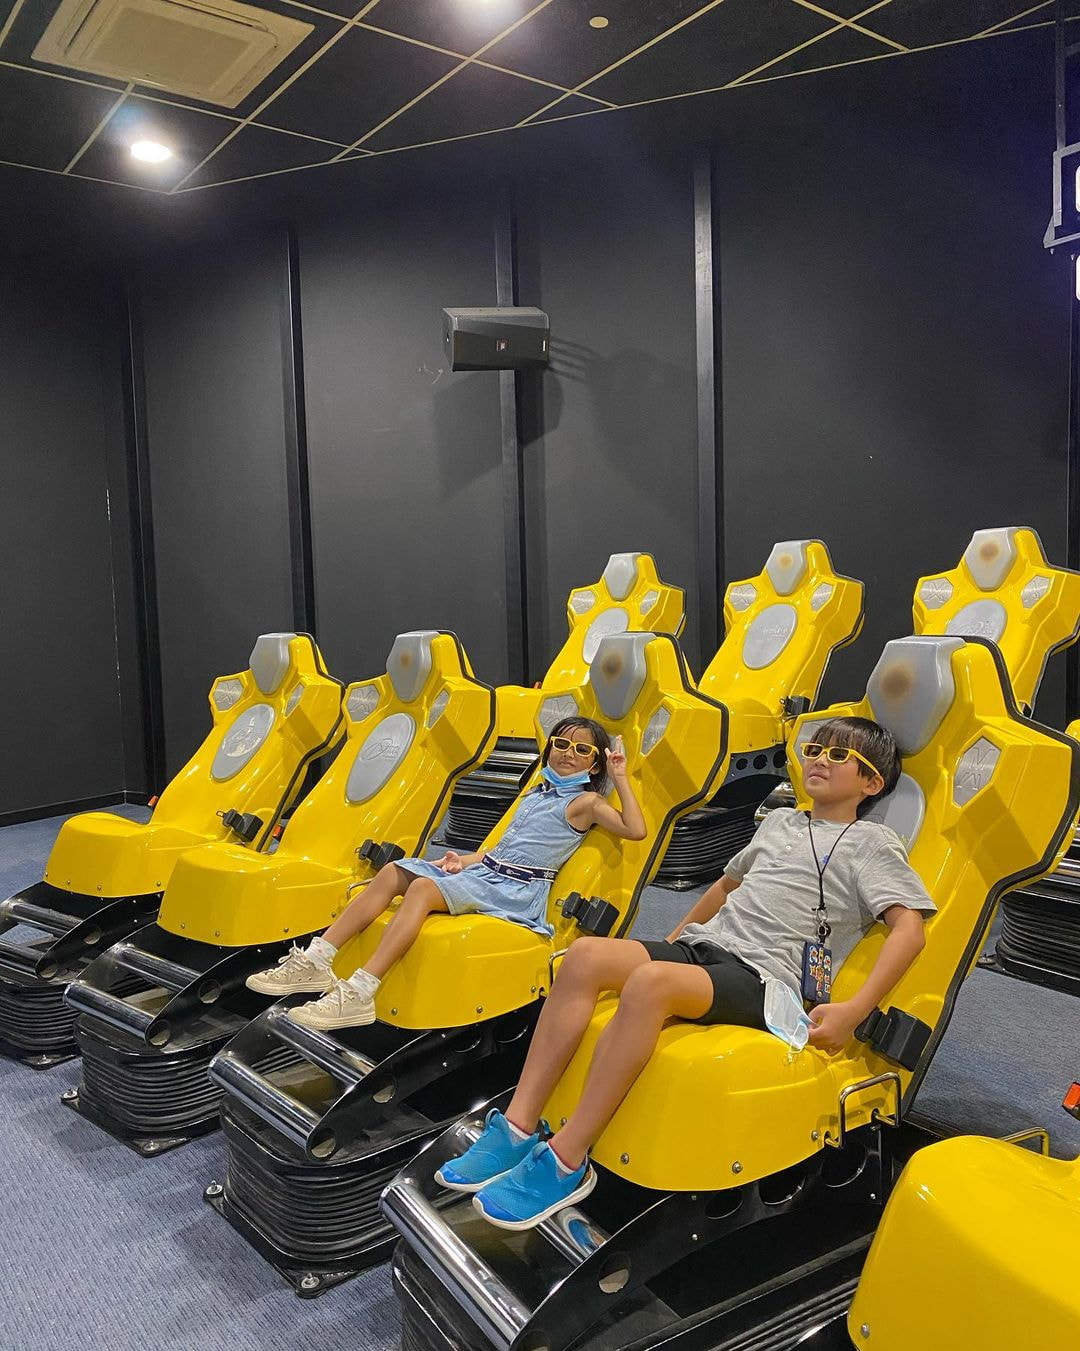 two kids on singapore discovery centre's xd theatre 4d cinema seats with special glasses